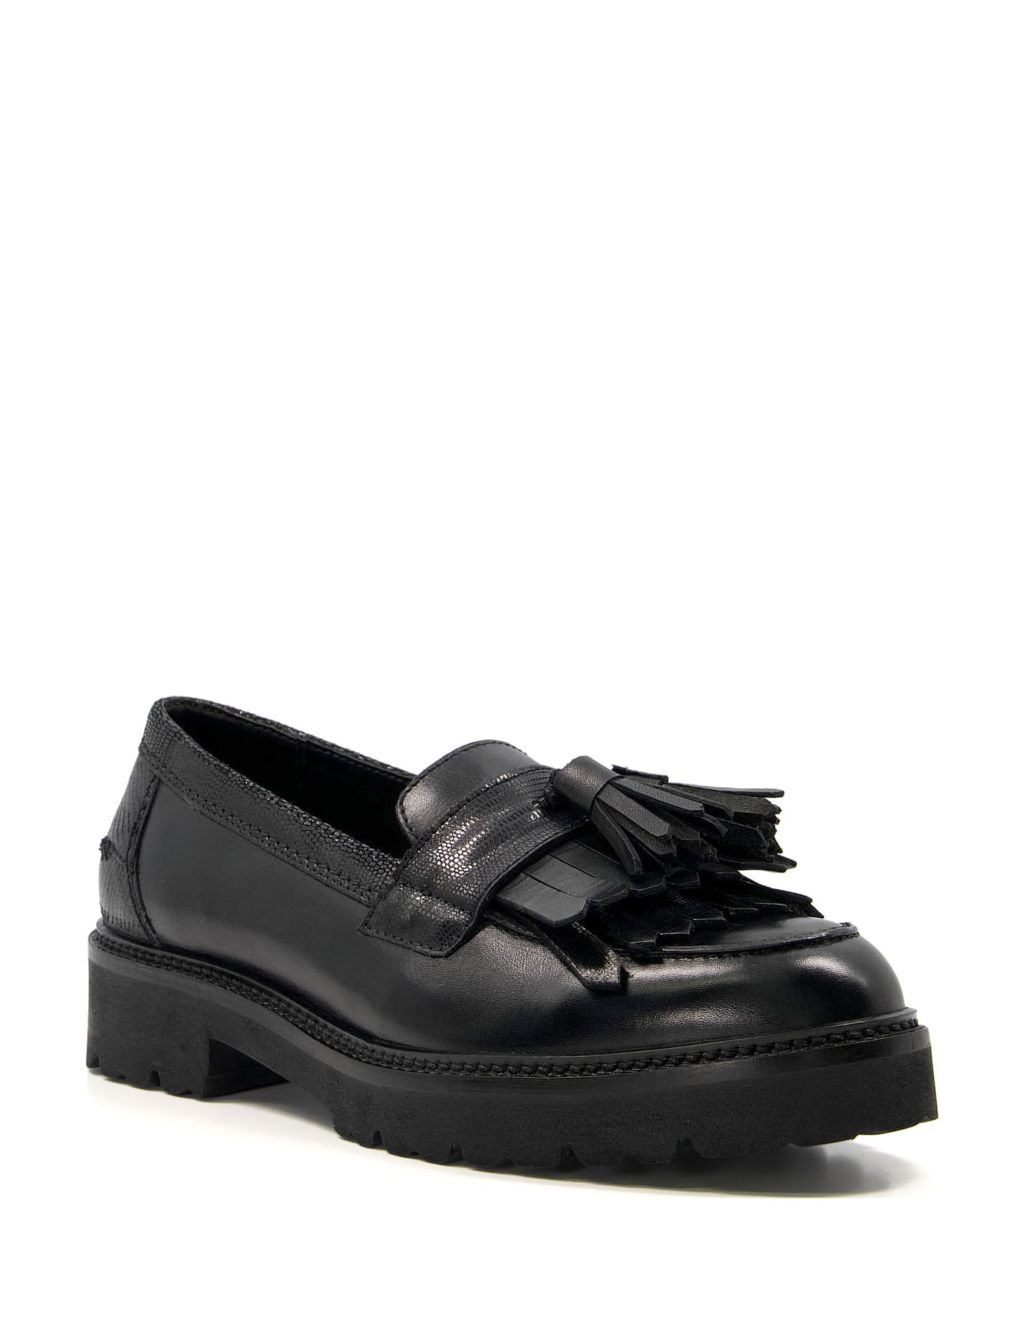 Women’s Loafers | M&S